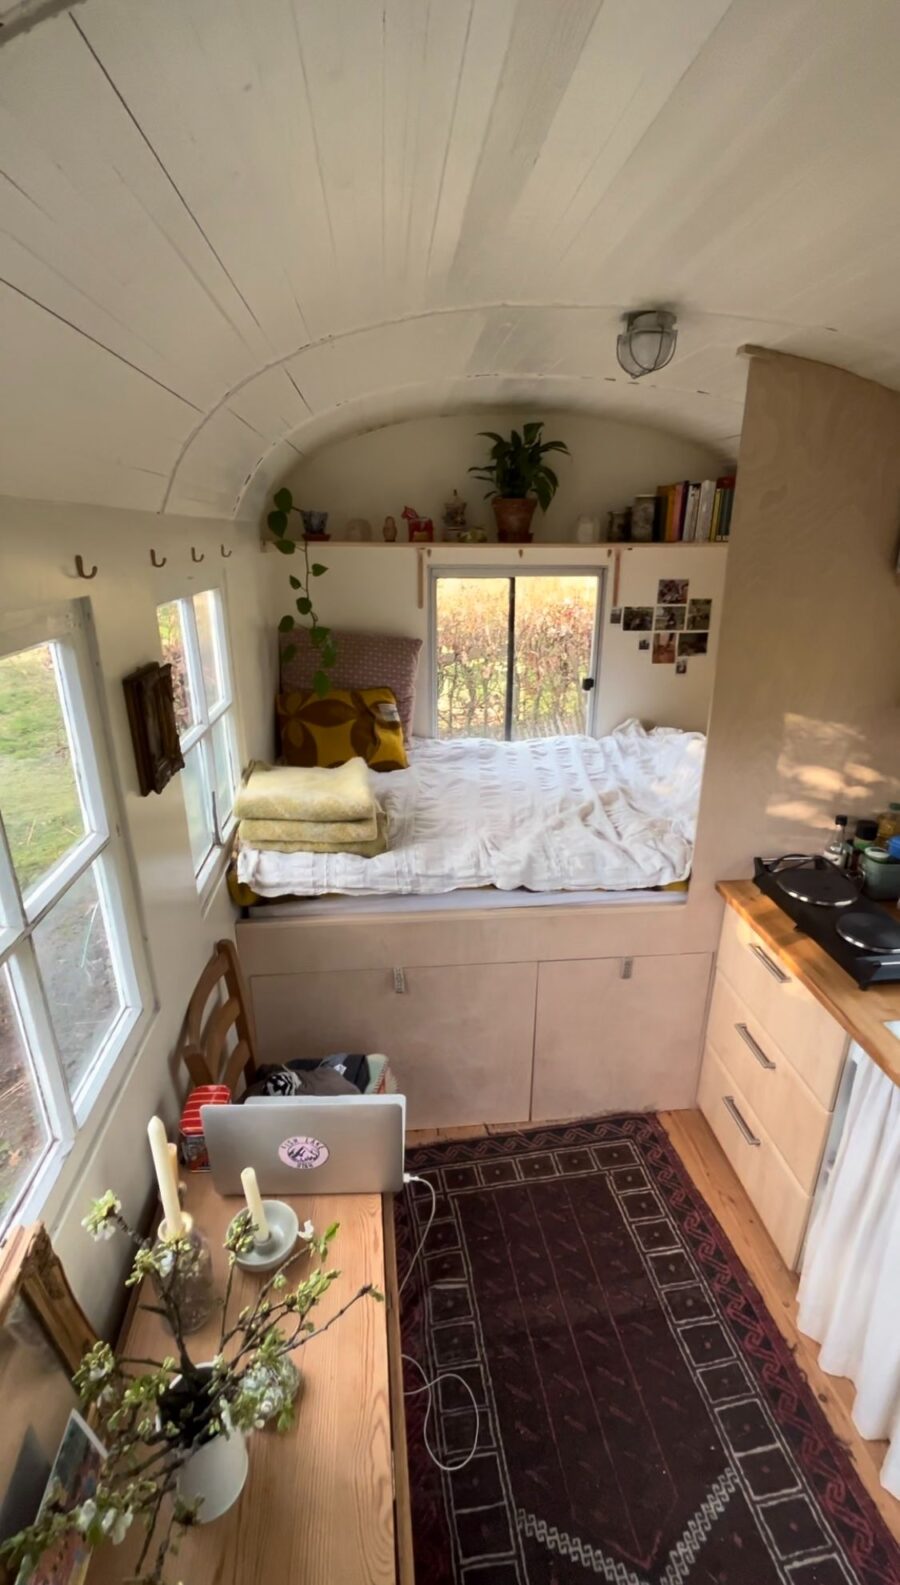 Supporting Her Mental Health in DIY Tiny Home 78